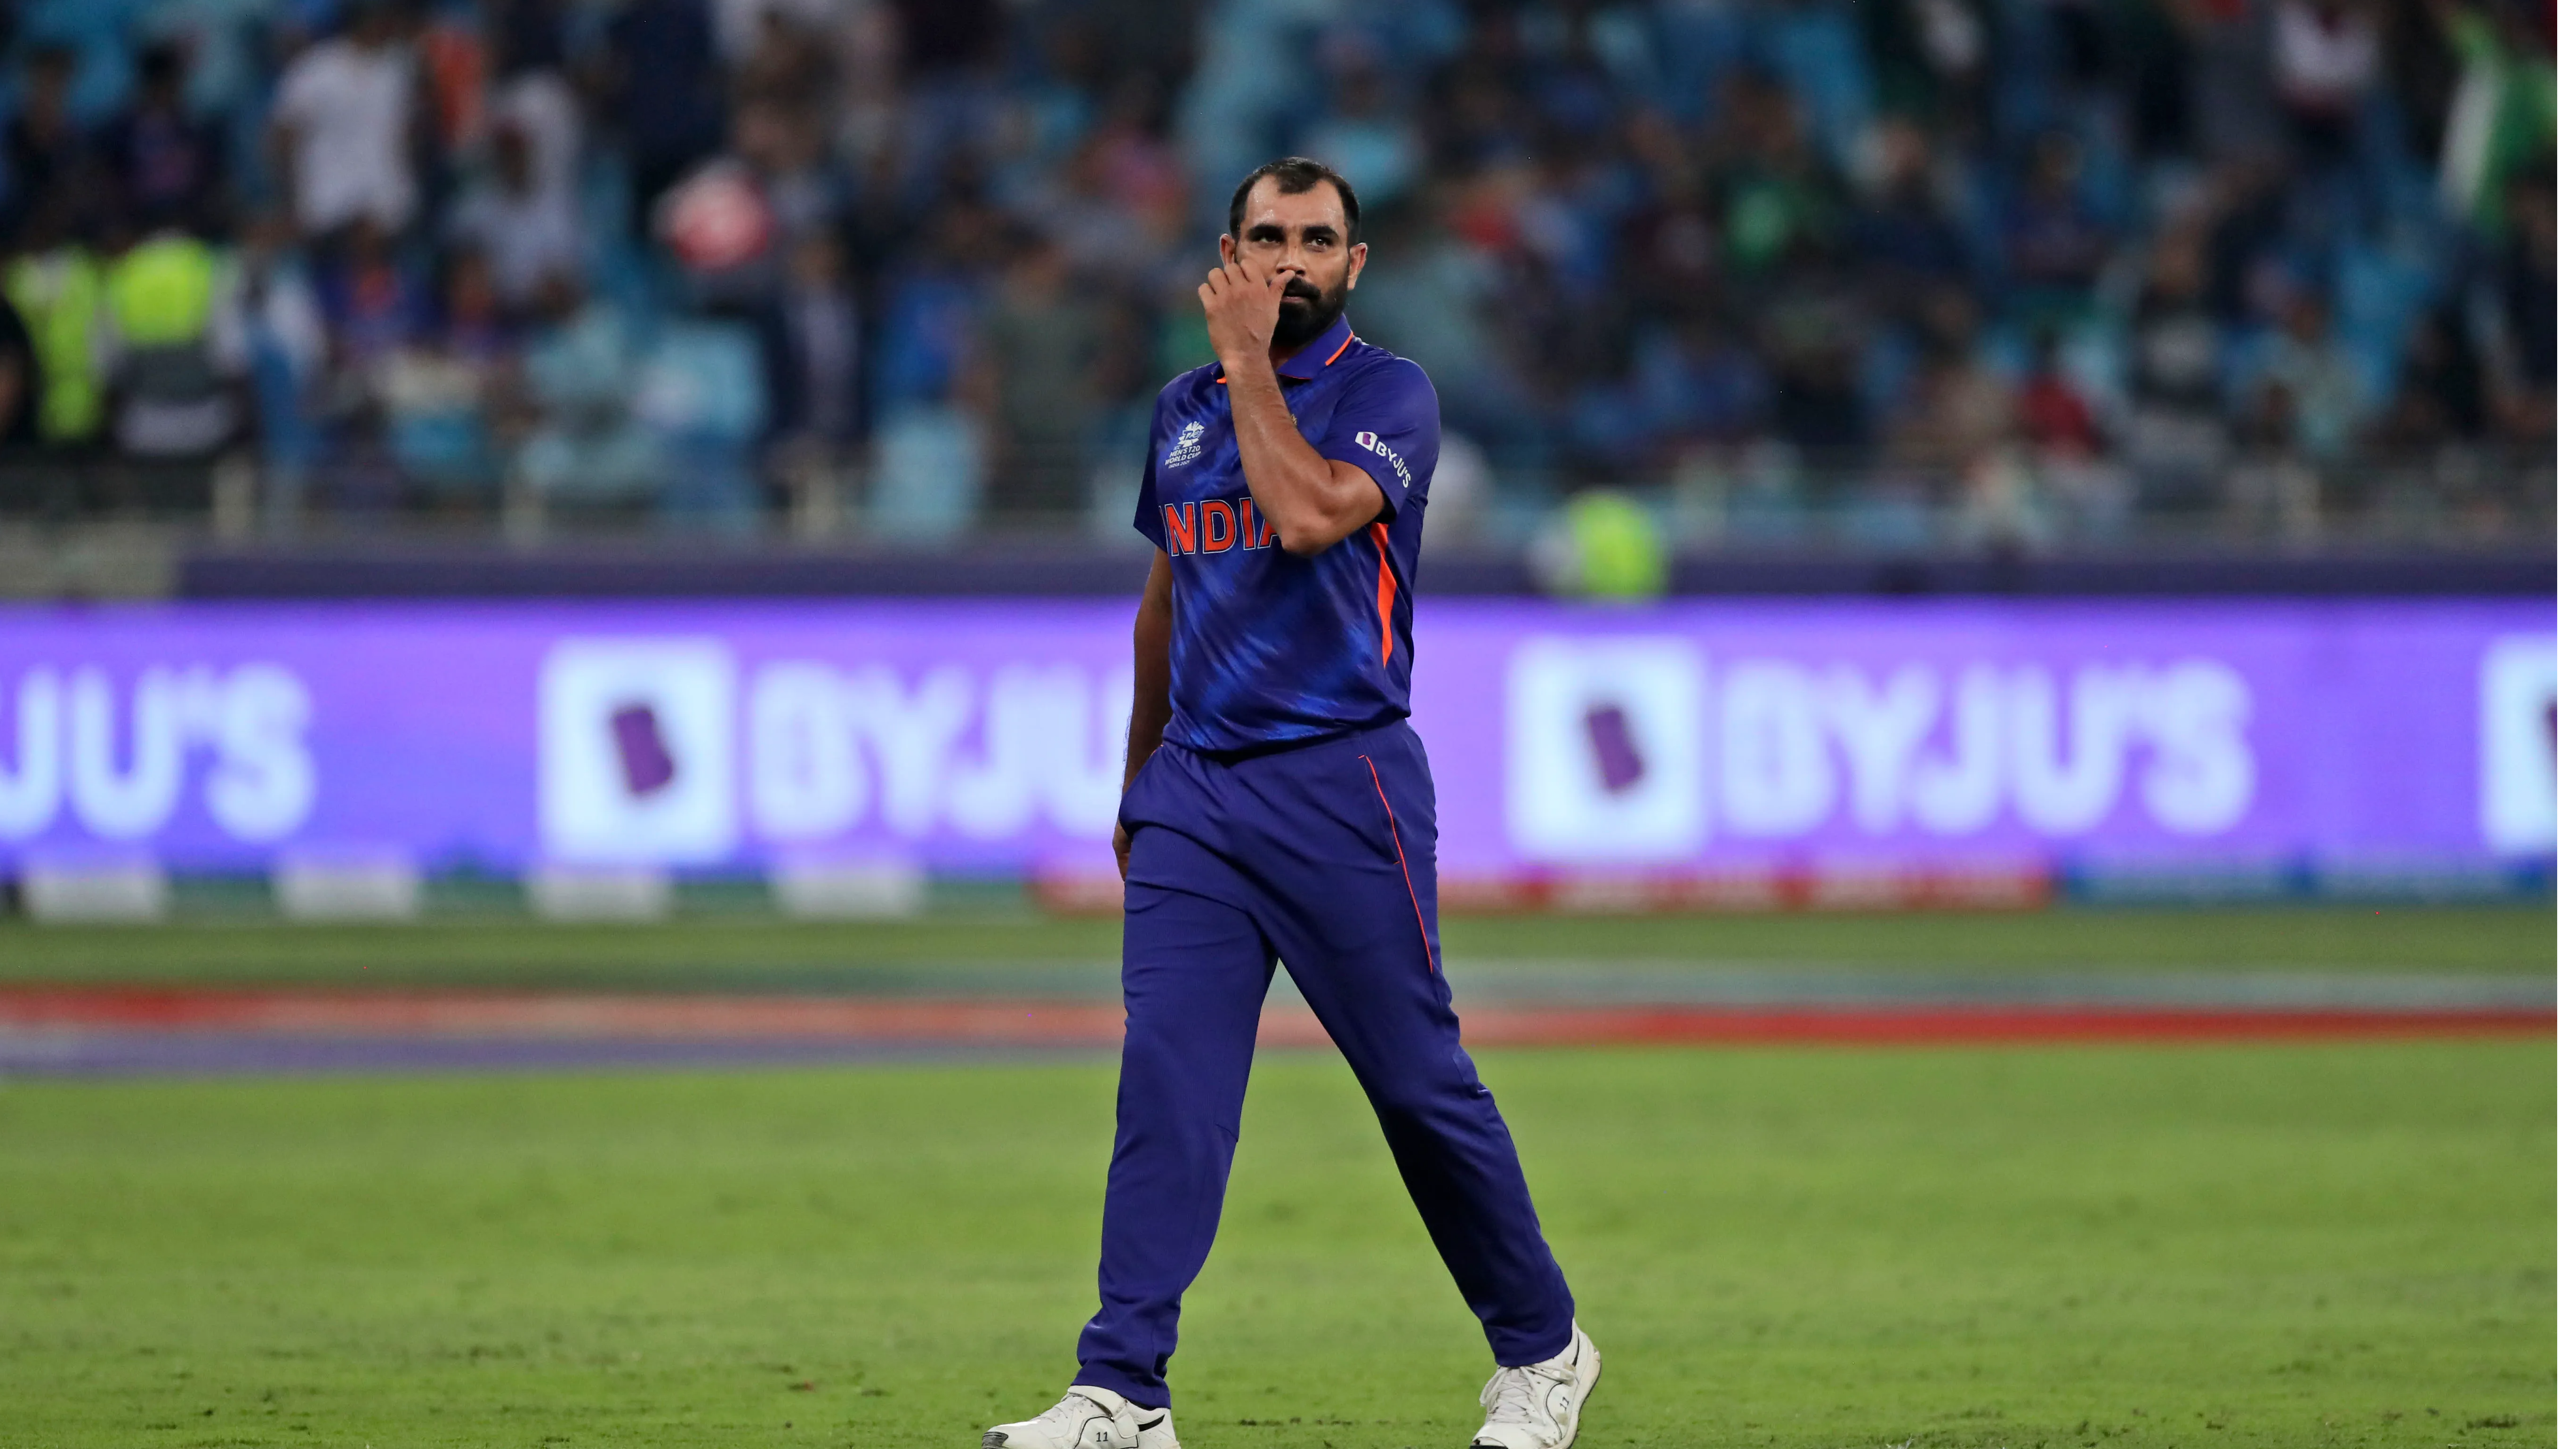 Ex-cricketers, politicians defend Shami amid online abuse after Pak loss